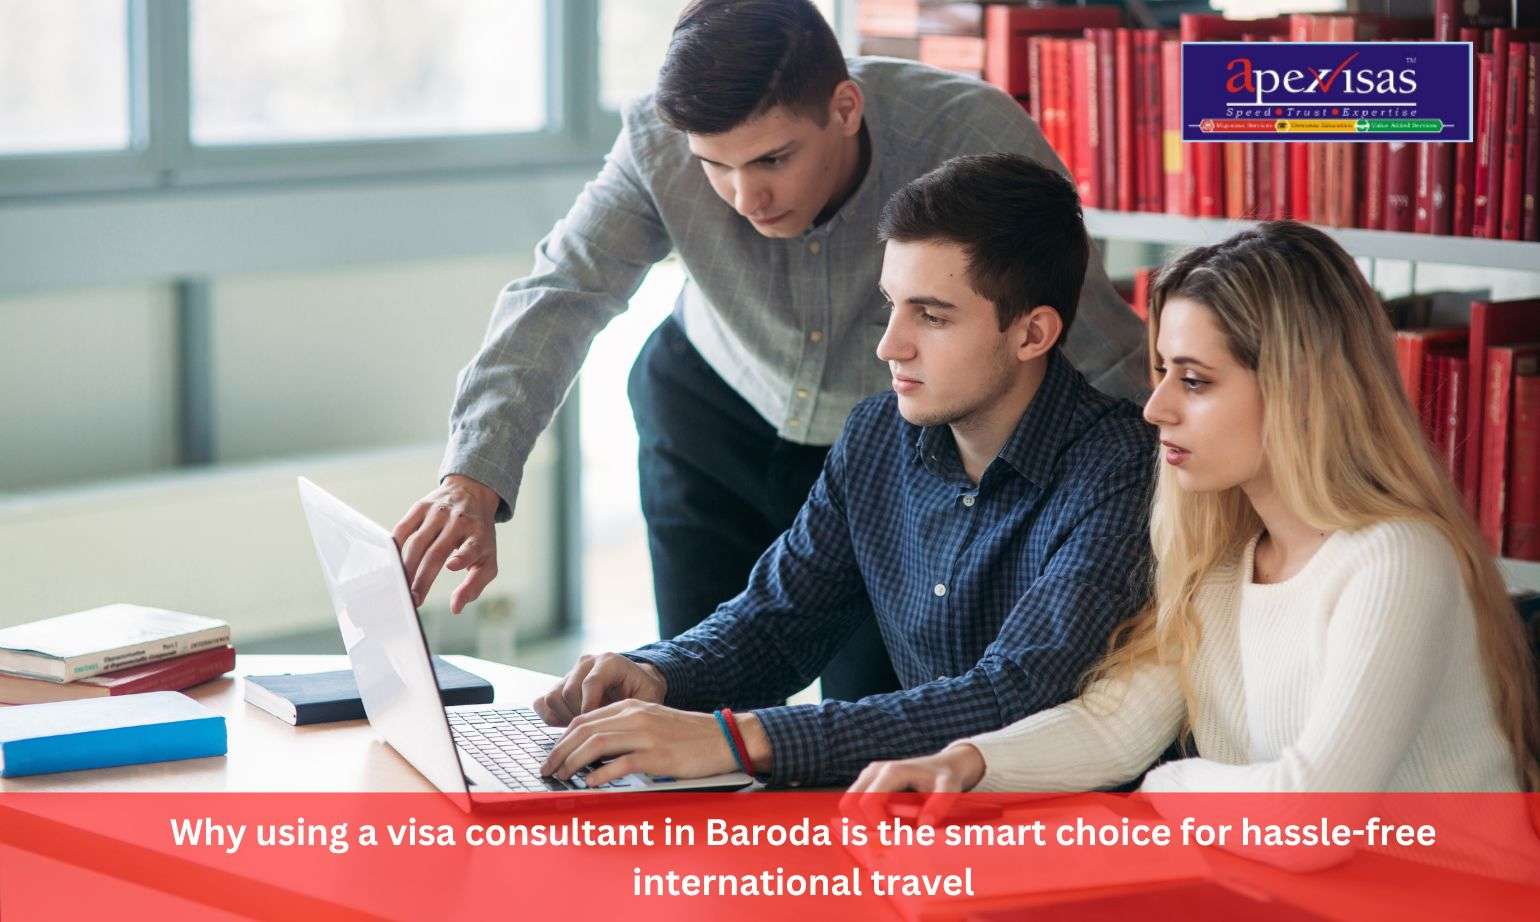 Why using a visa consultant in Baroda is the smart choice for hassle-free international travel